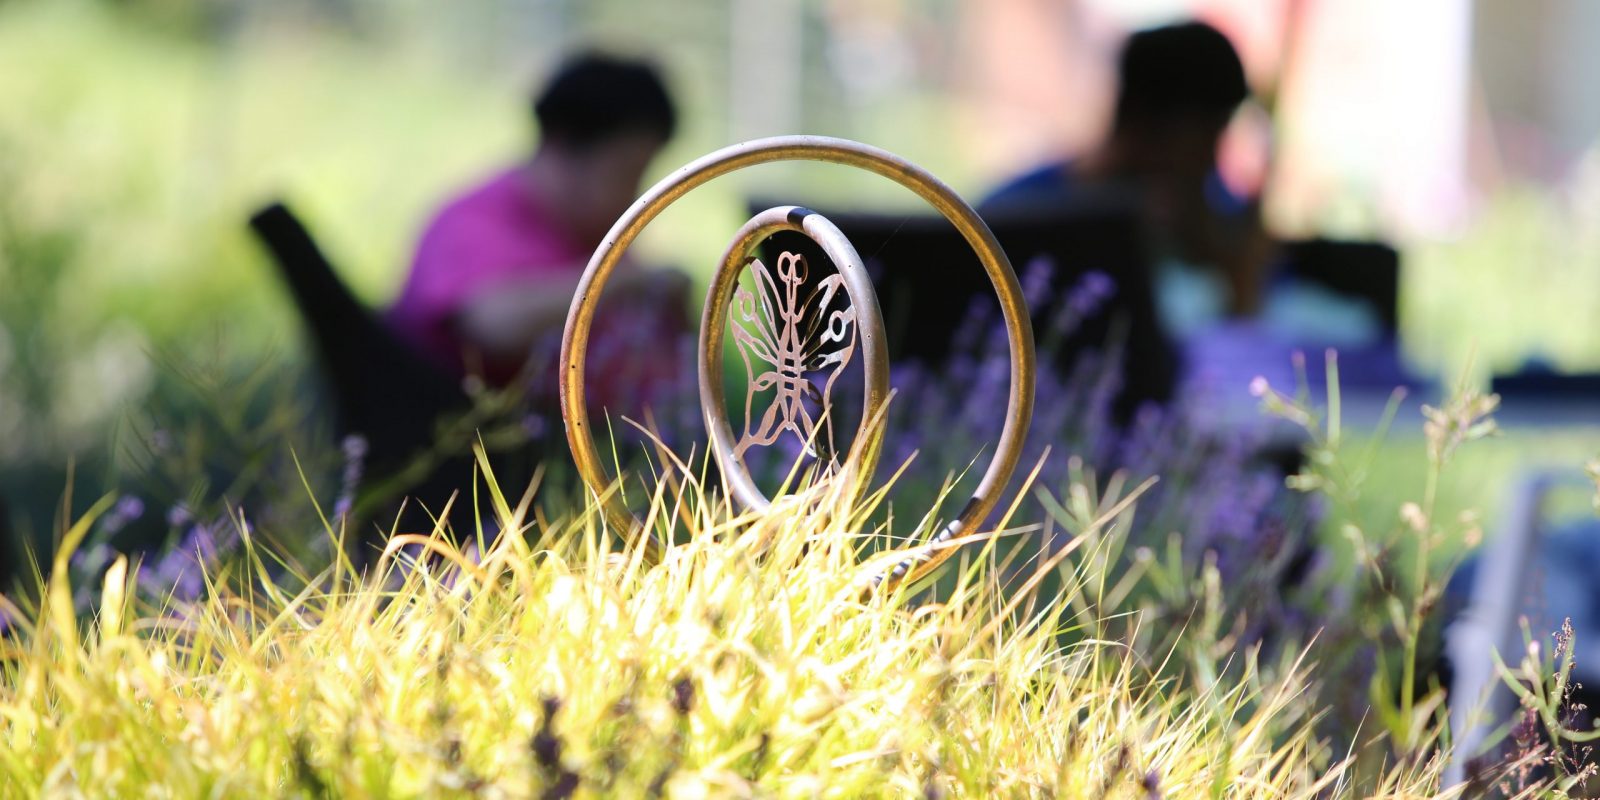 Photo of sprinkler among grass in Tavon's sensory garden with people in the background